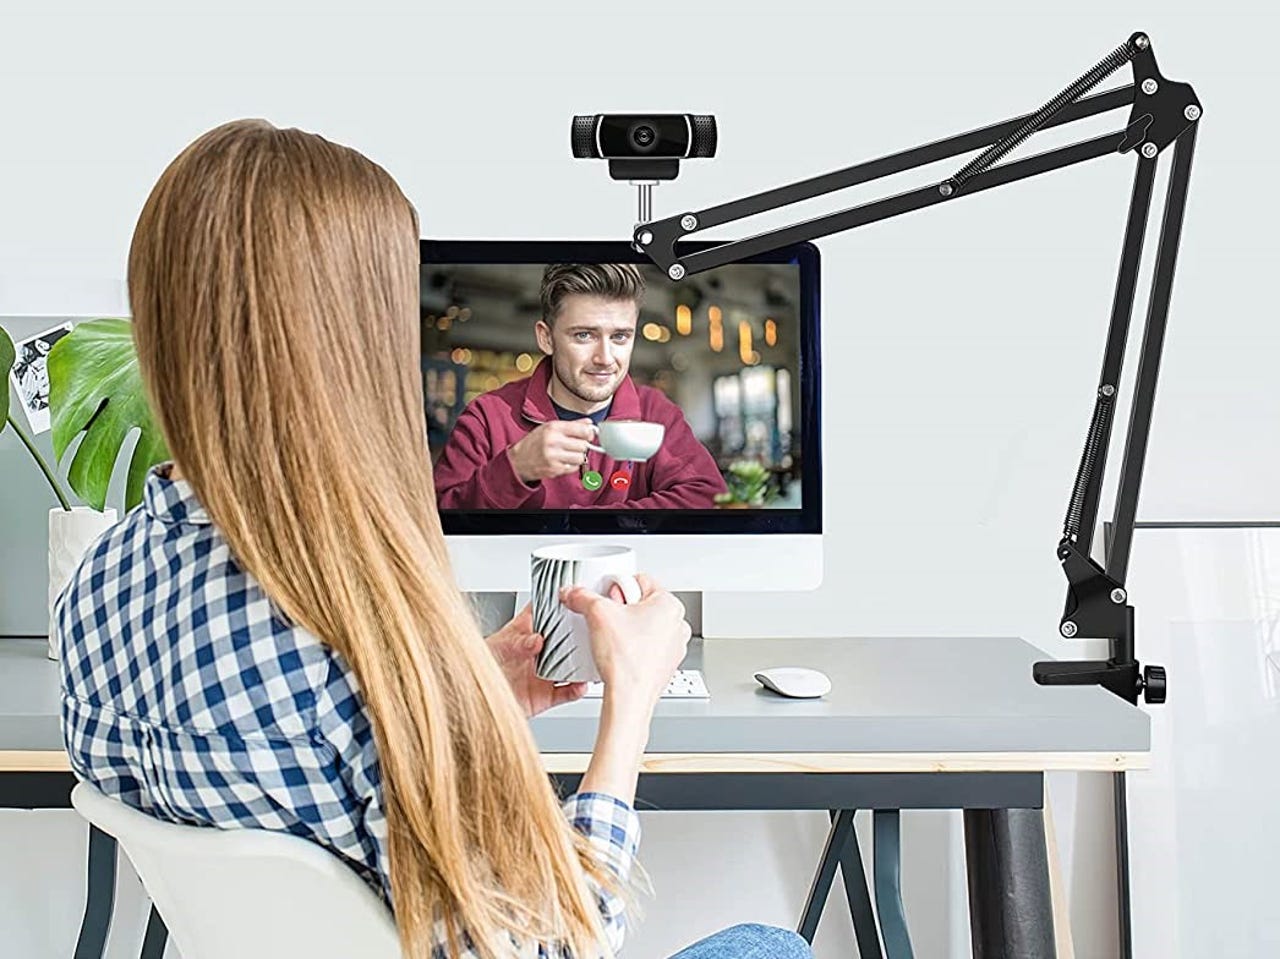 How To Connect HD Webcam To Your Laptop Or PC